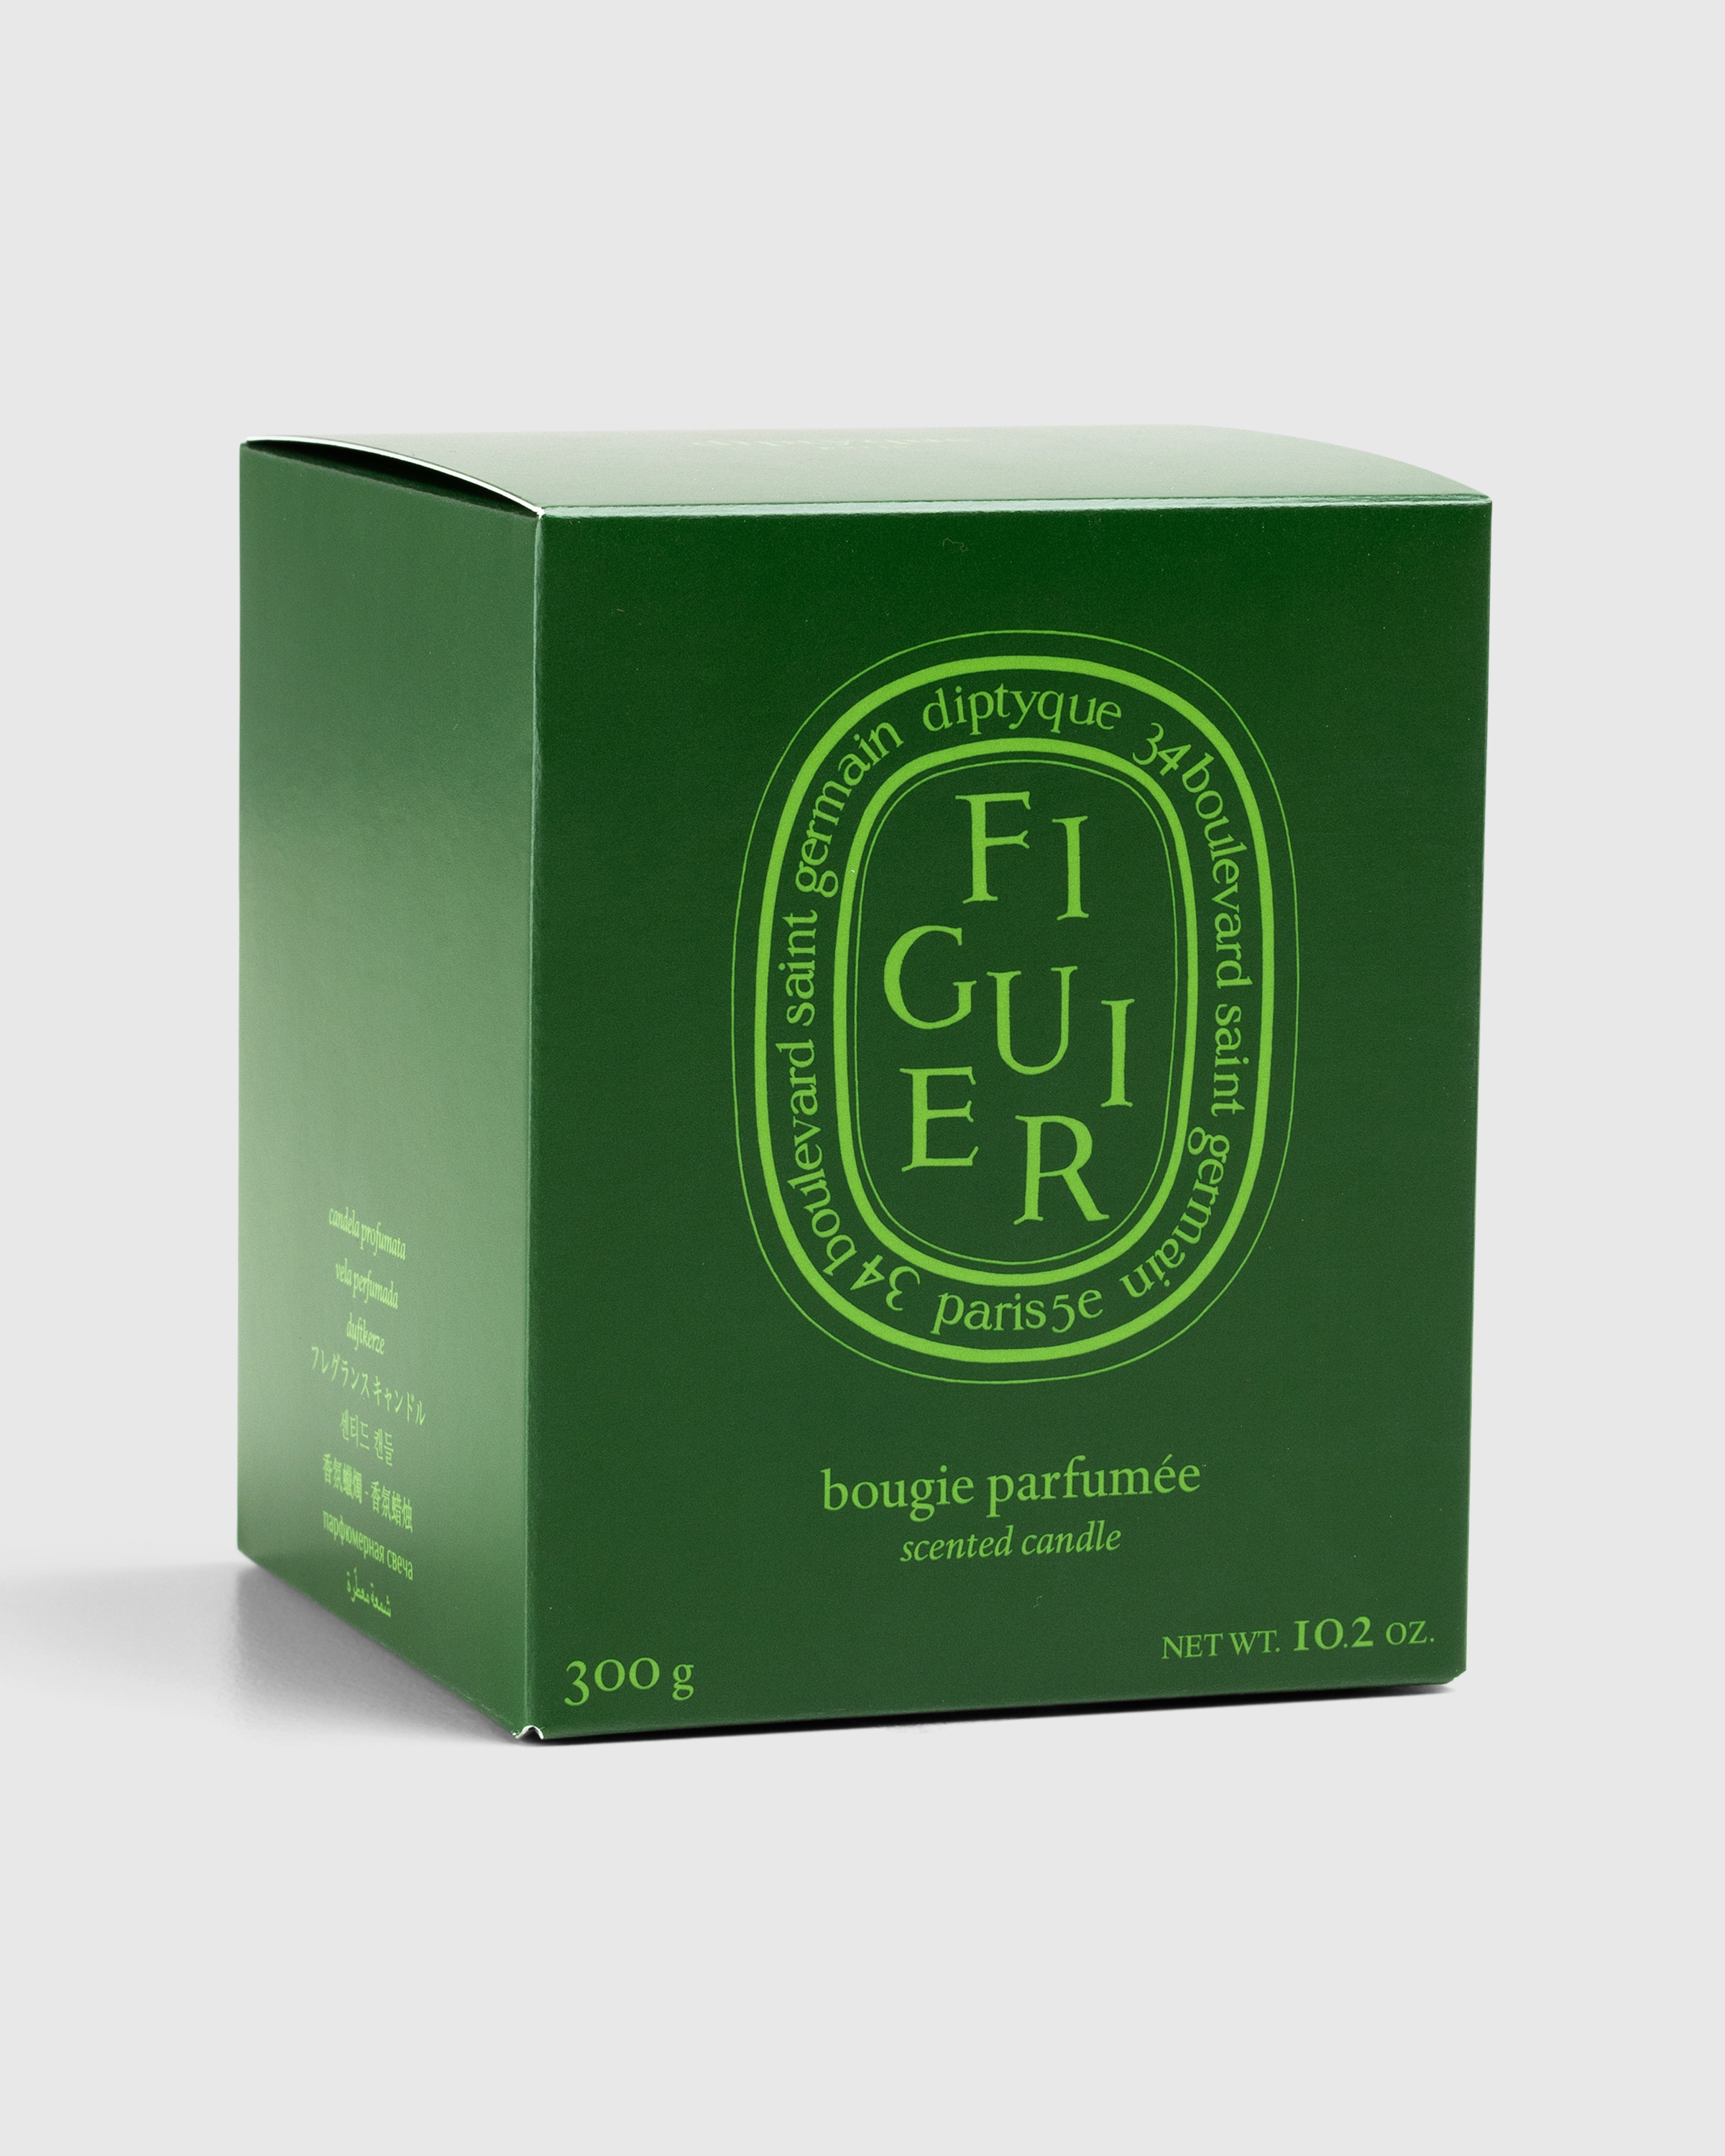 Diptyque – Green Candle Figuier 300g - Candles & Fragrances - Green - Image 3